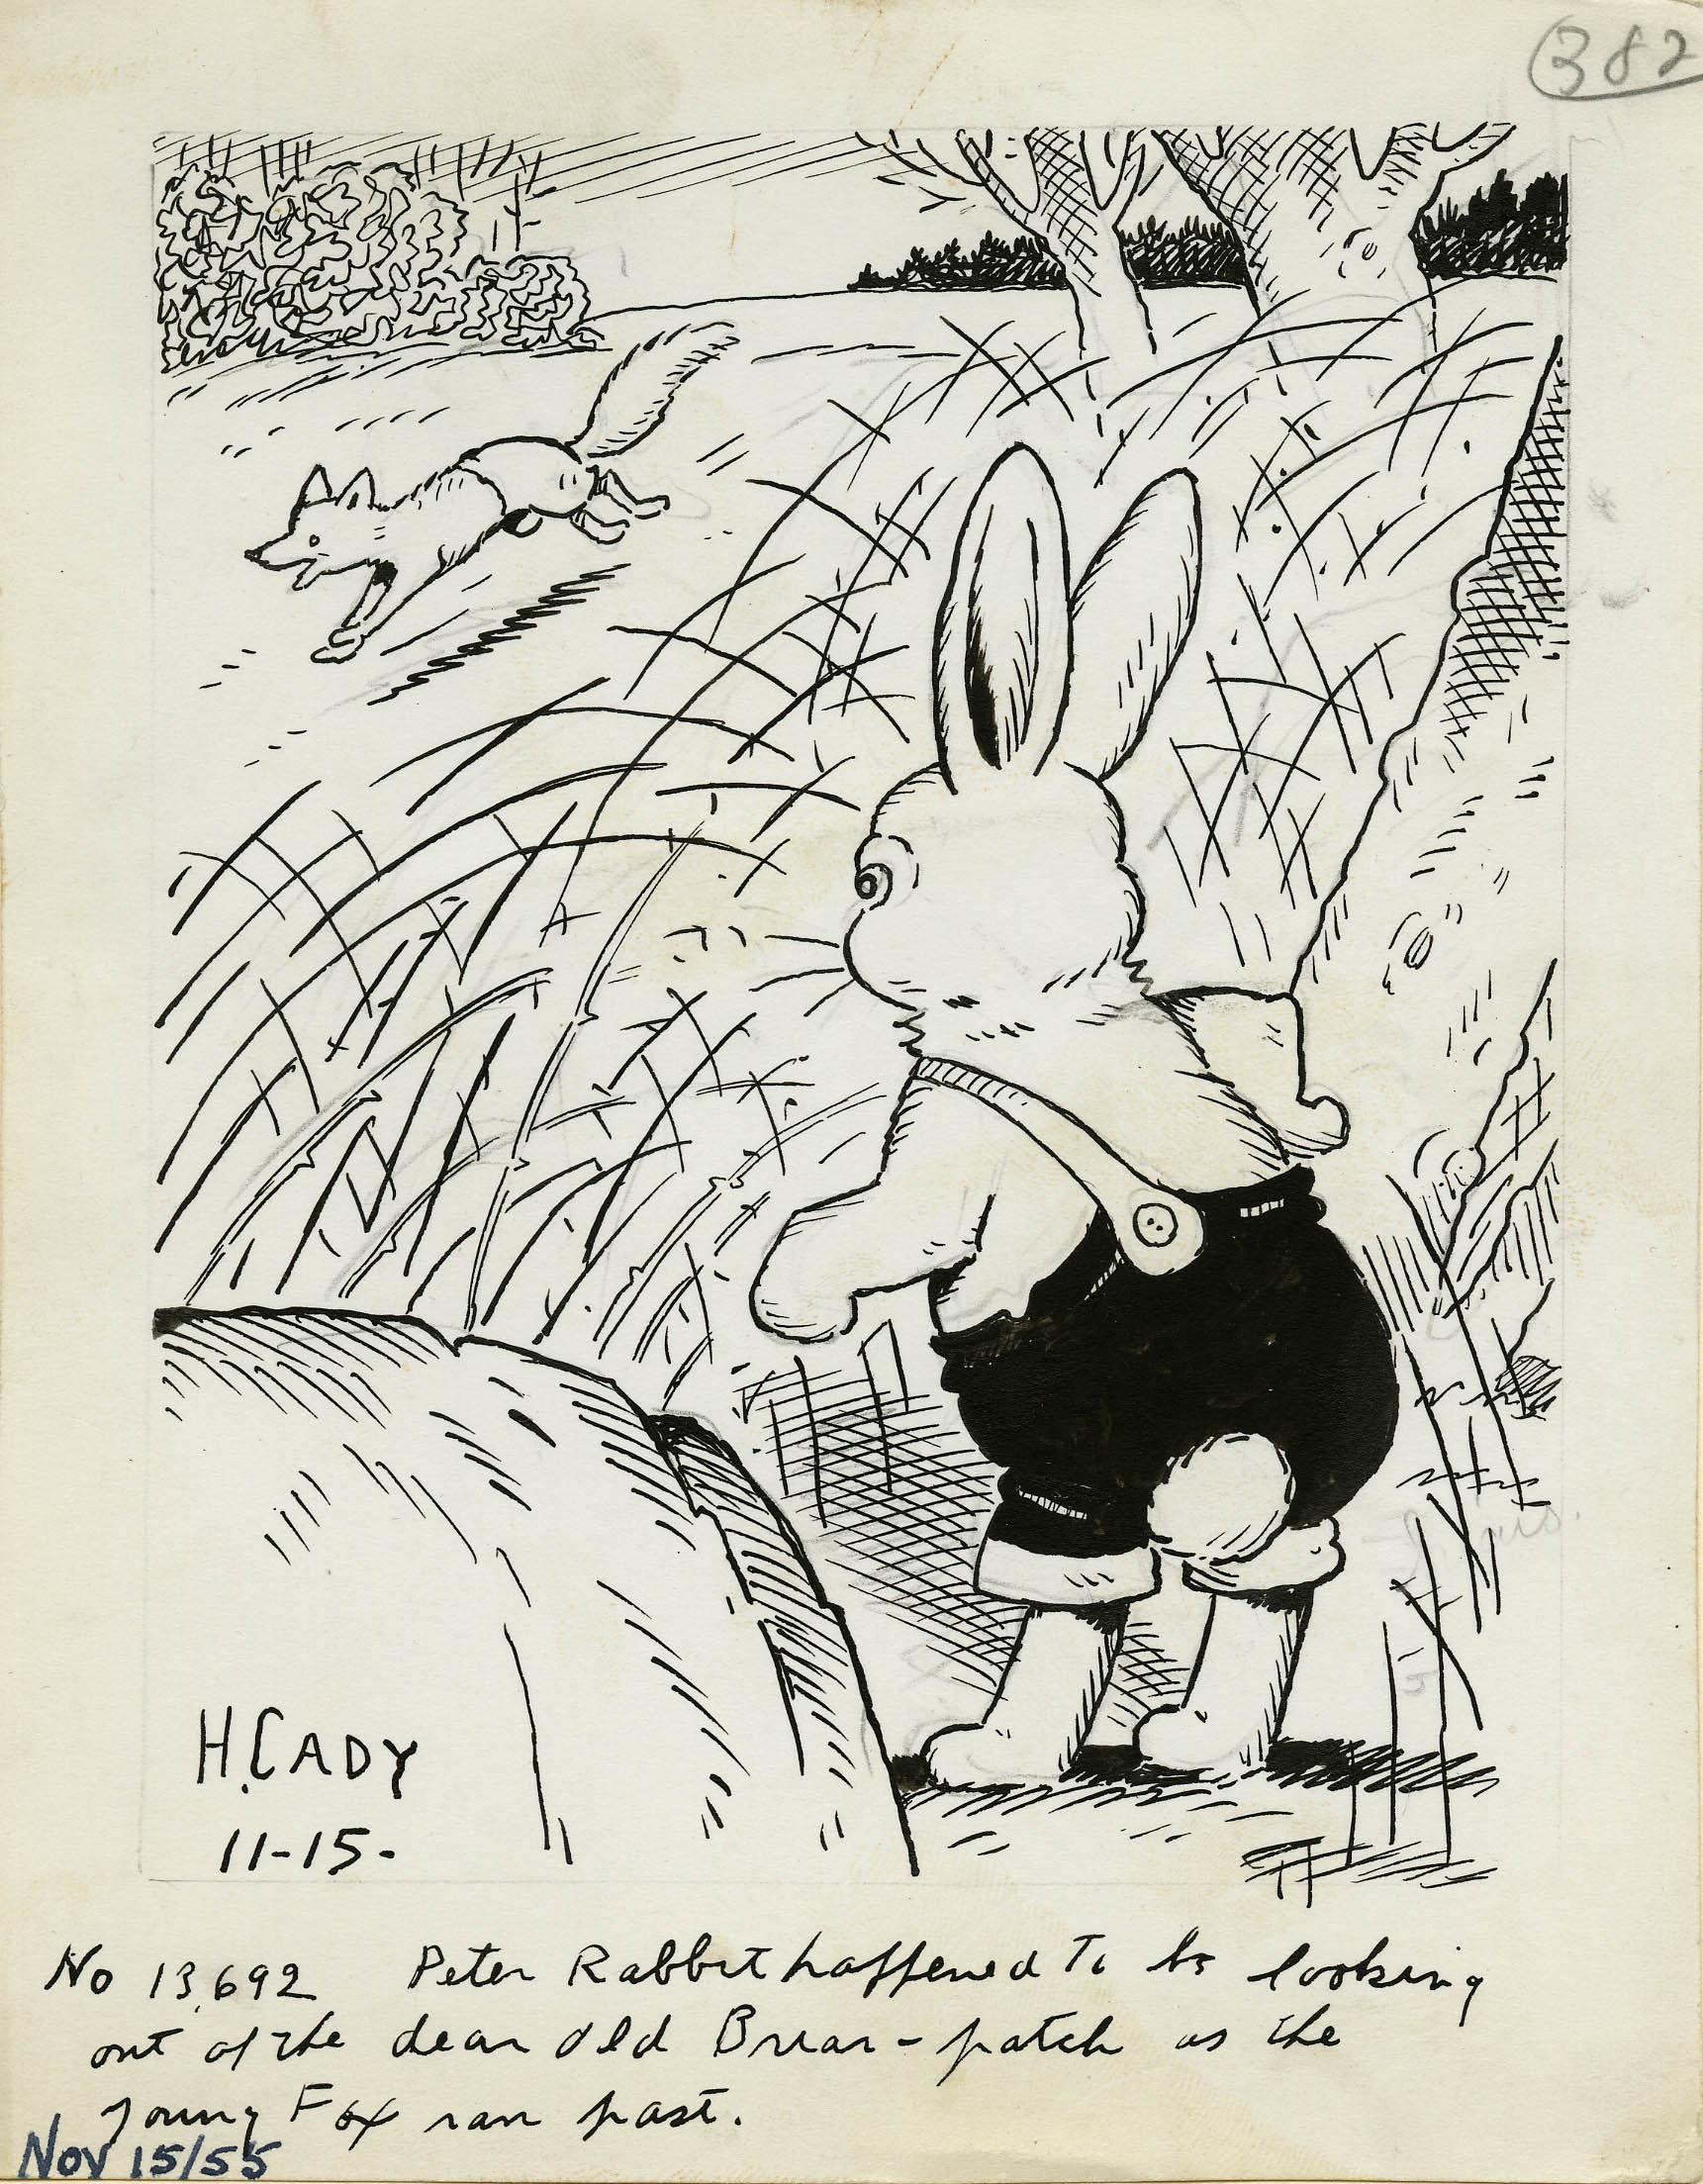 Harrison Cady Animal Art - Peter Rabbit happened to be looking out of the dear Old Briar-patch as the young